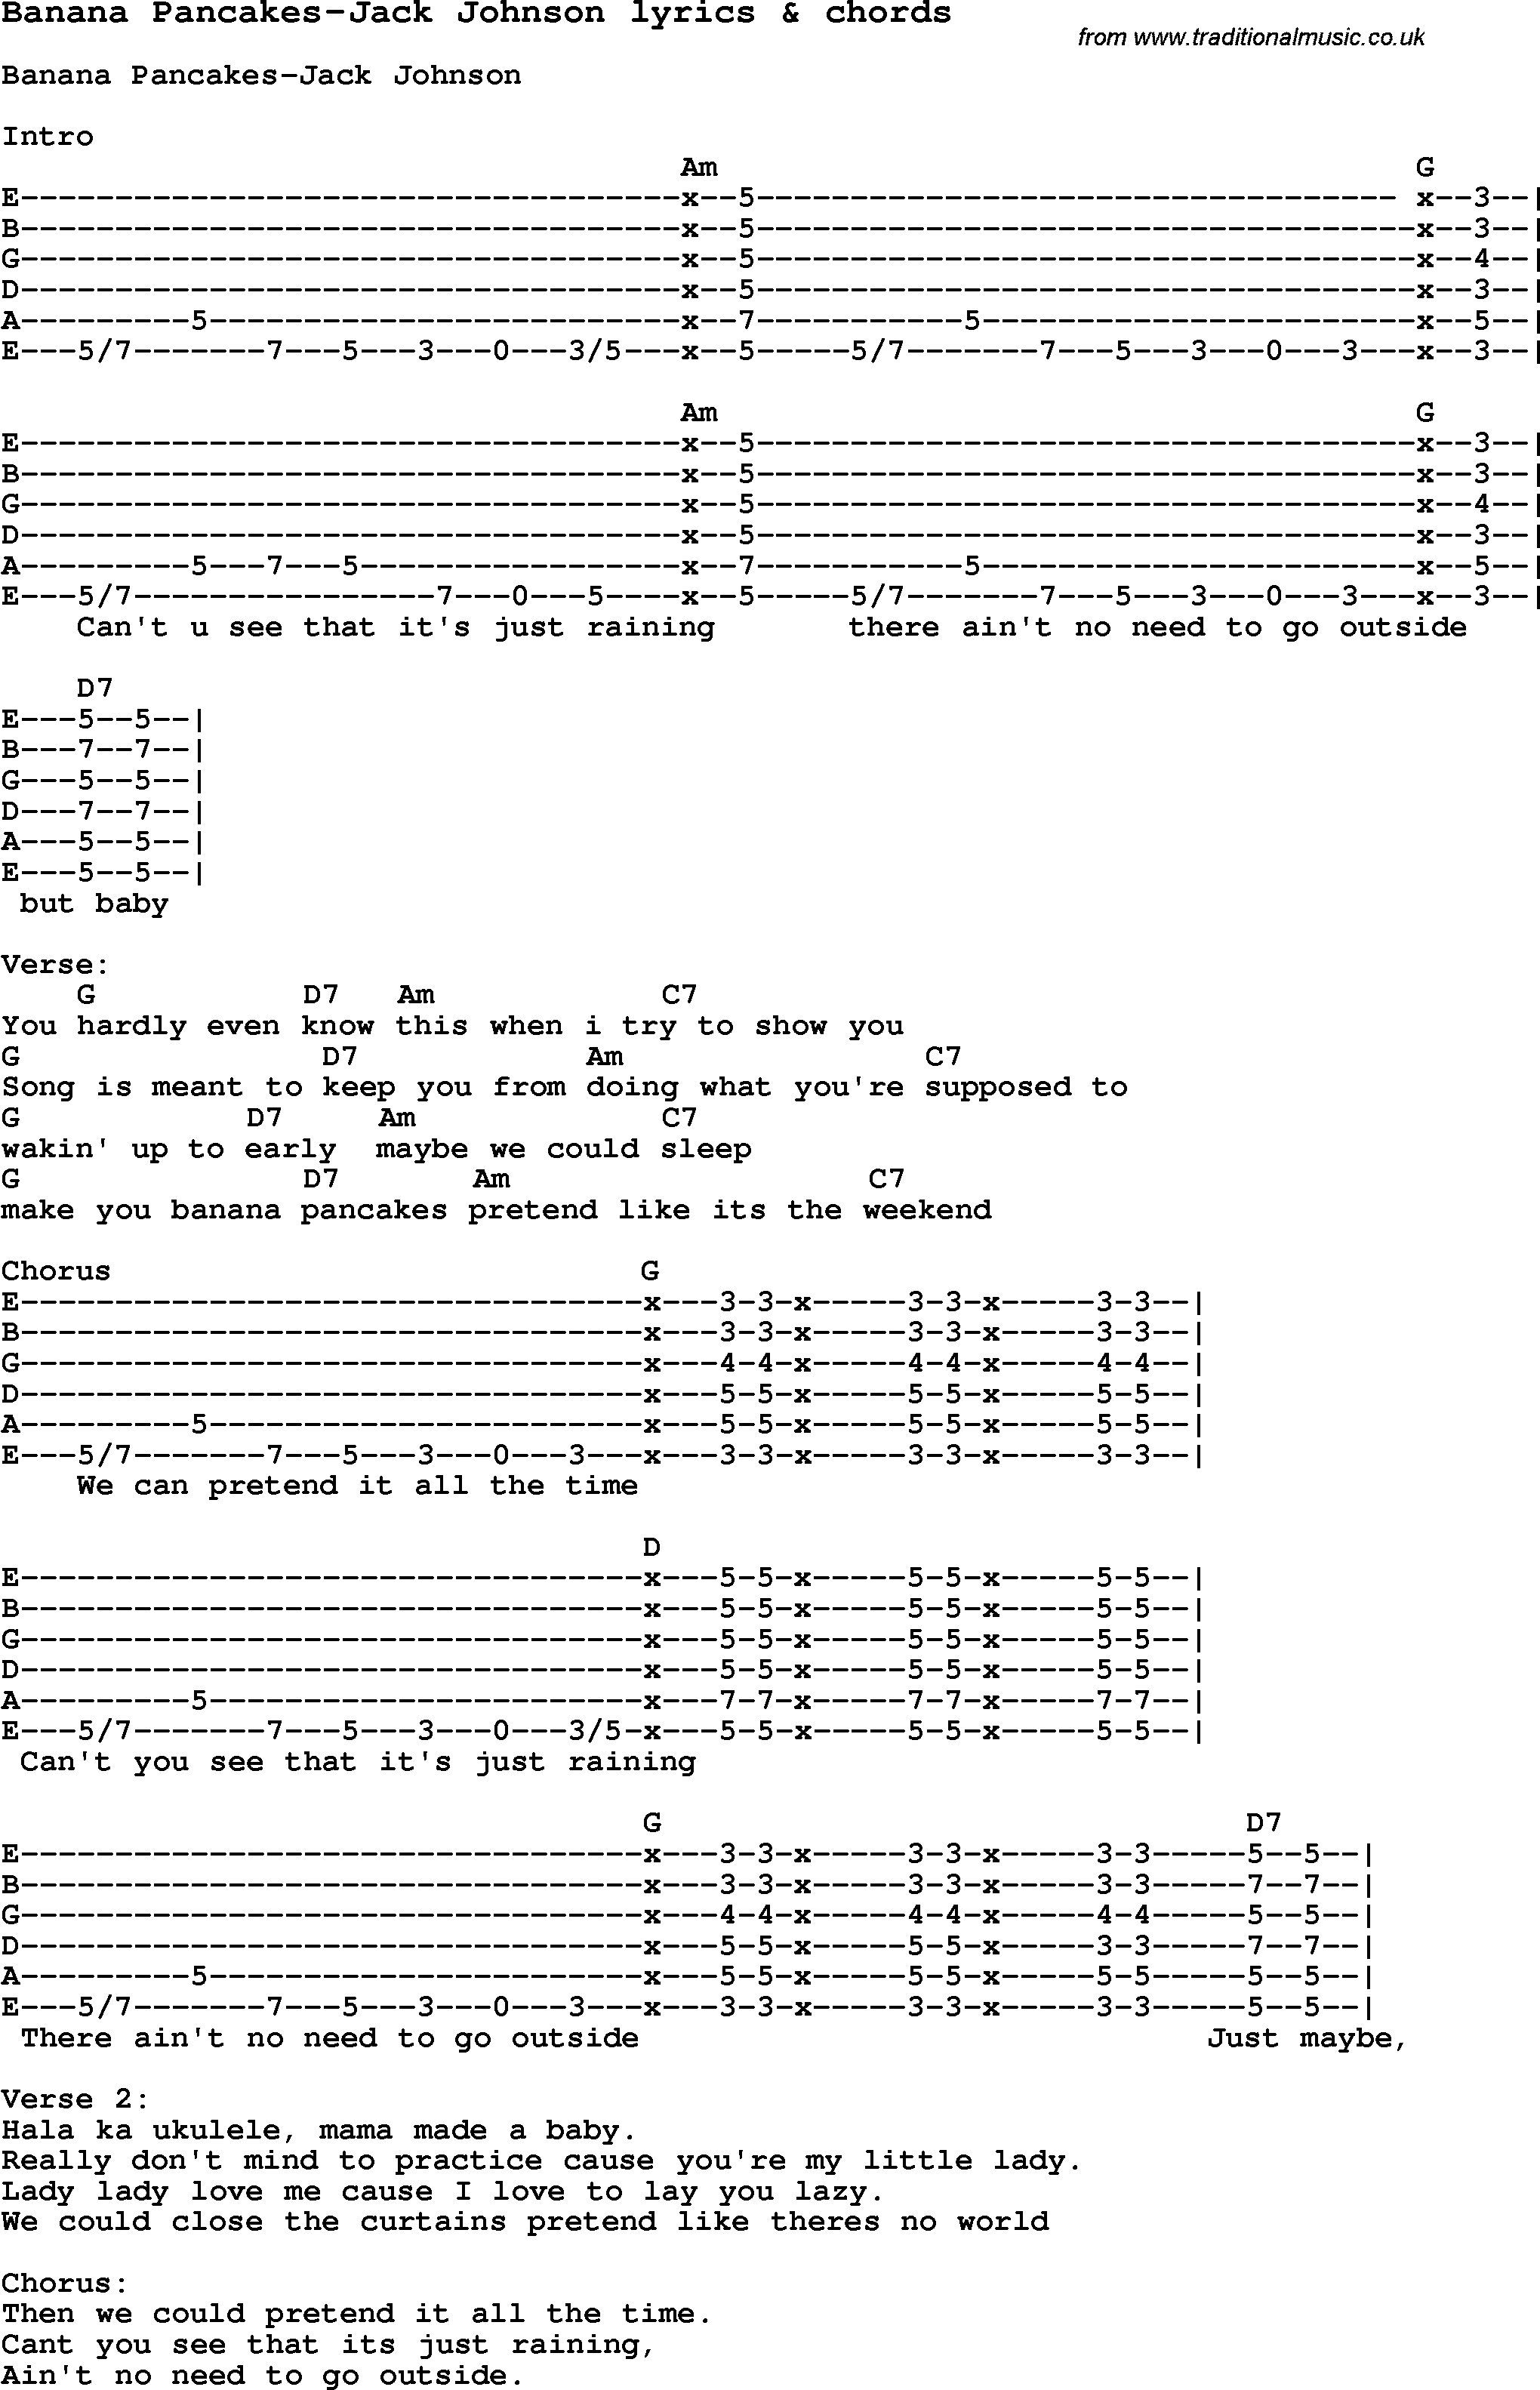 Upside Down by Jack Johnson - Easy Guitar Tab - Guitar Instructor